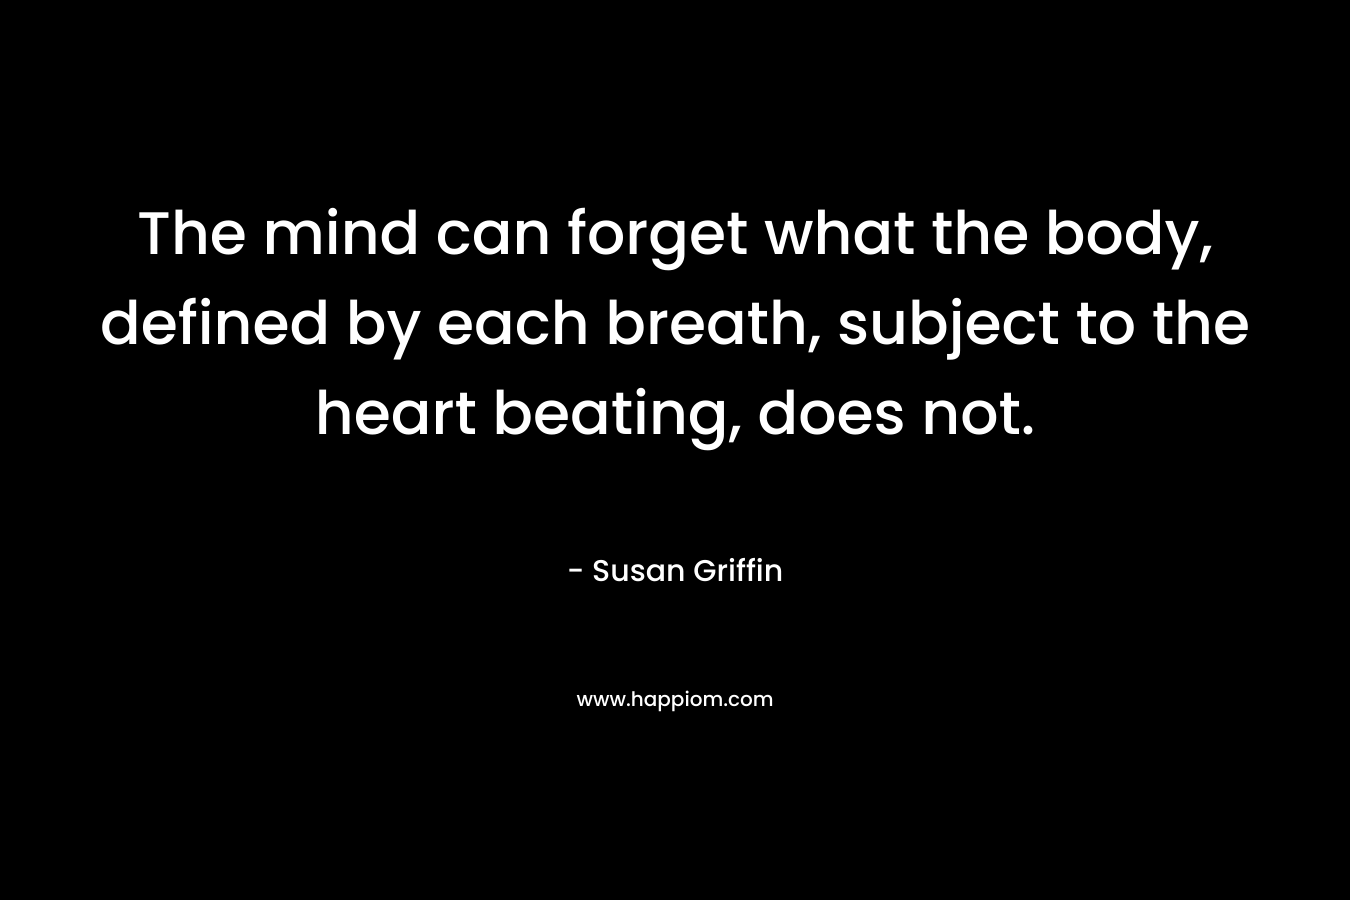 The mind can forget what the body, defined by each breath, subject to the heart beating, does not. – Susan Griffin